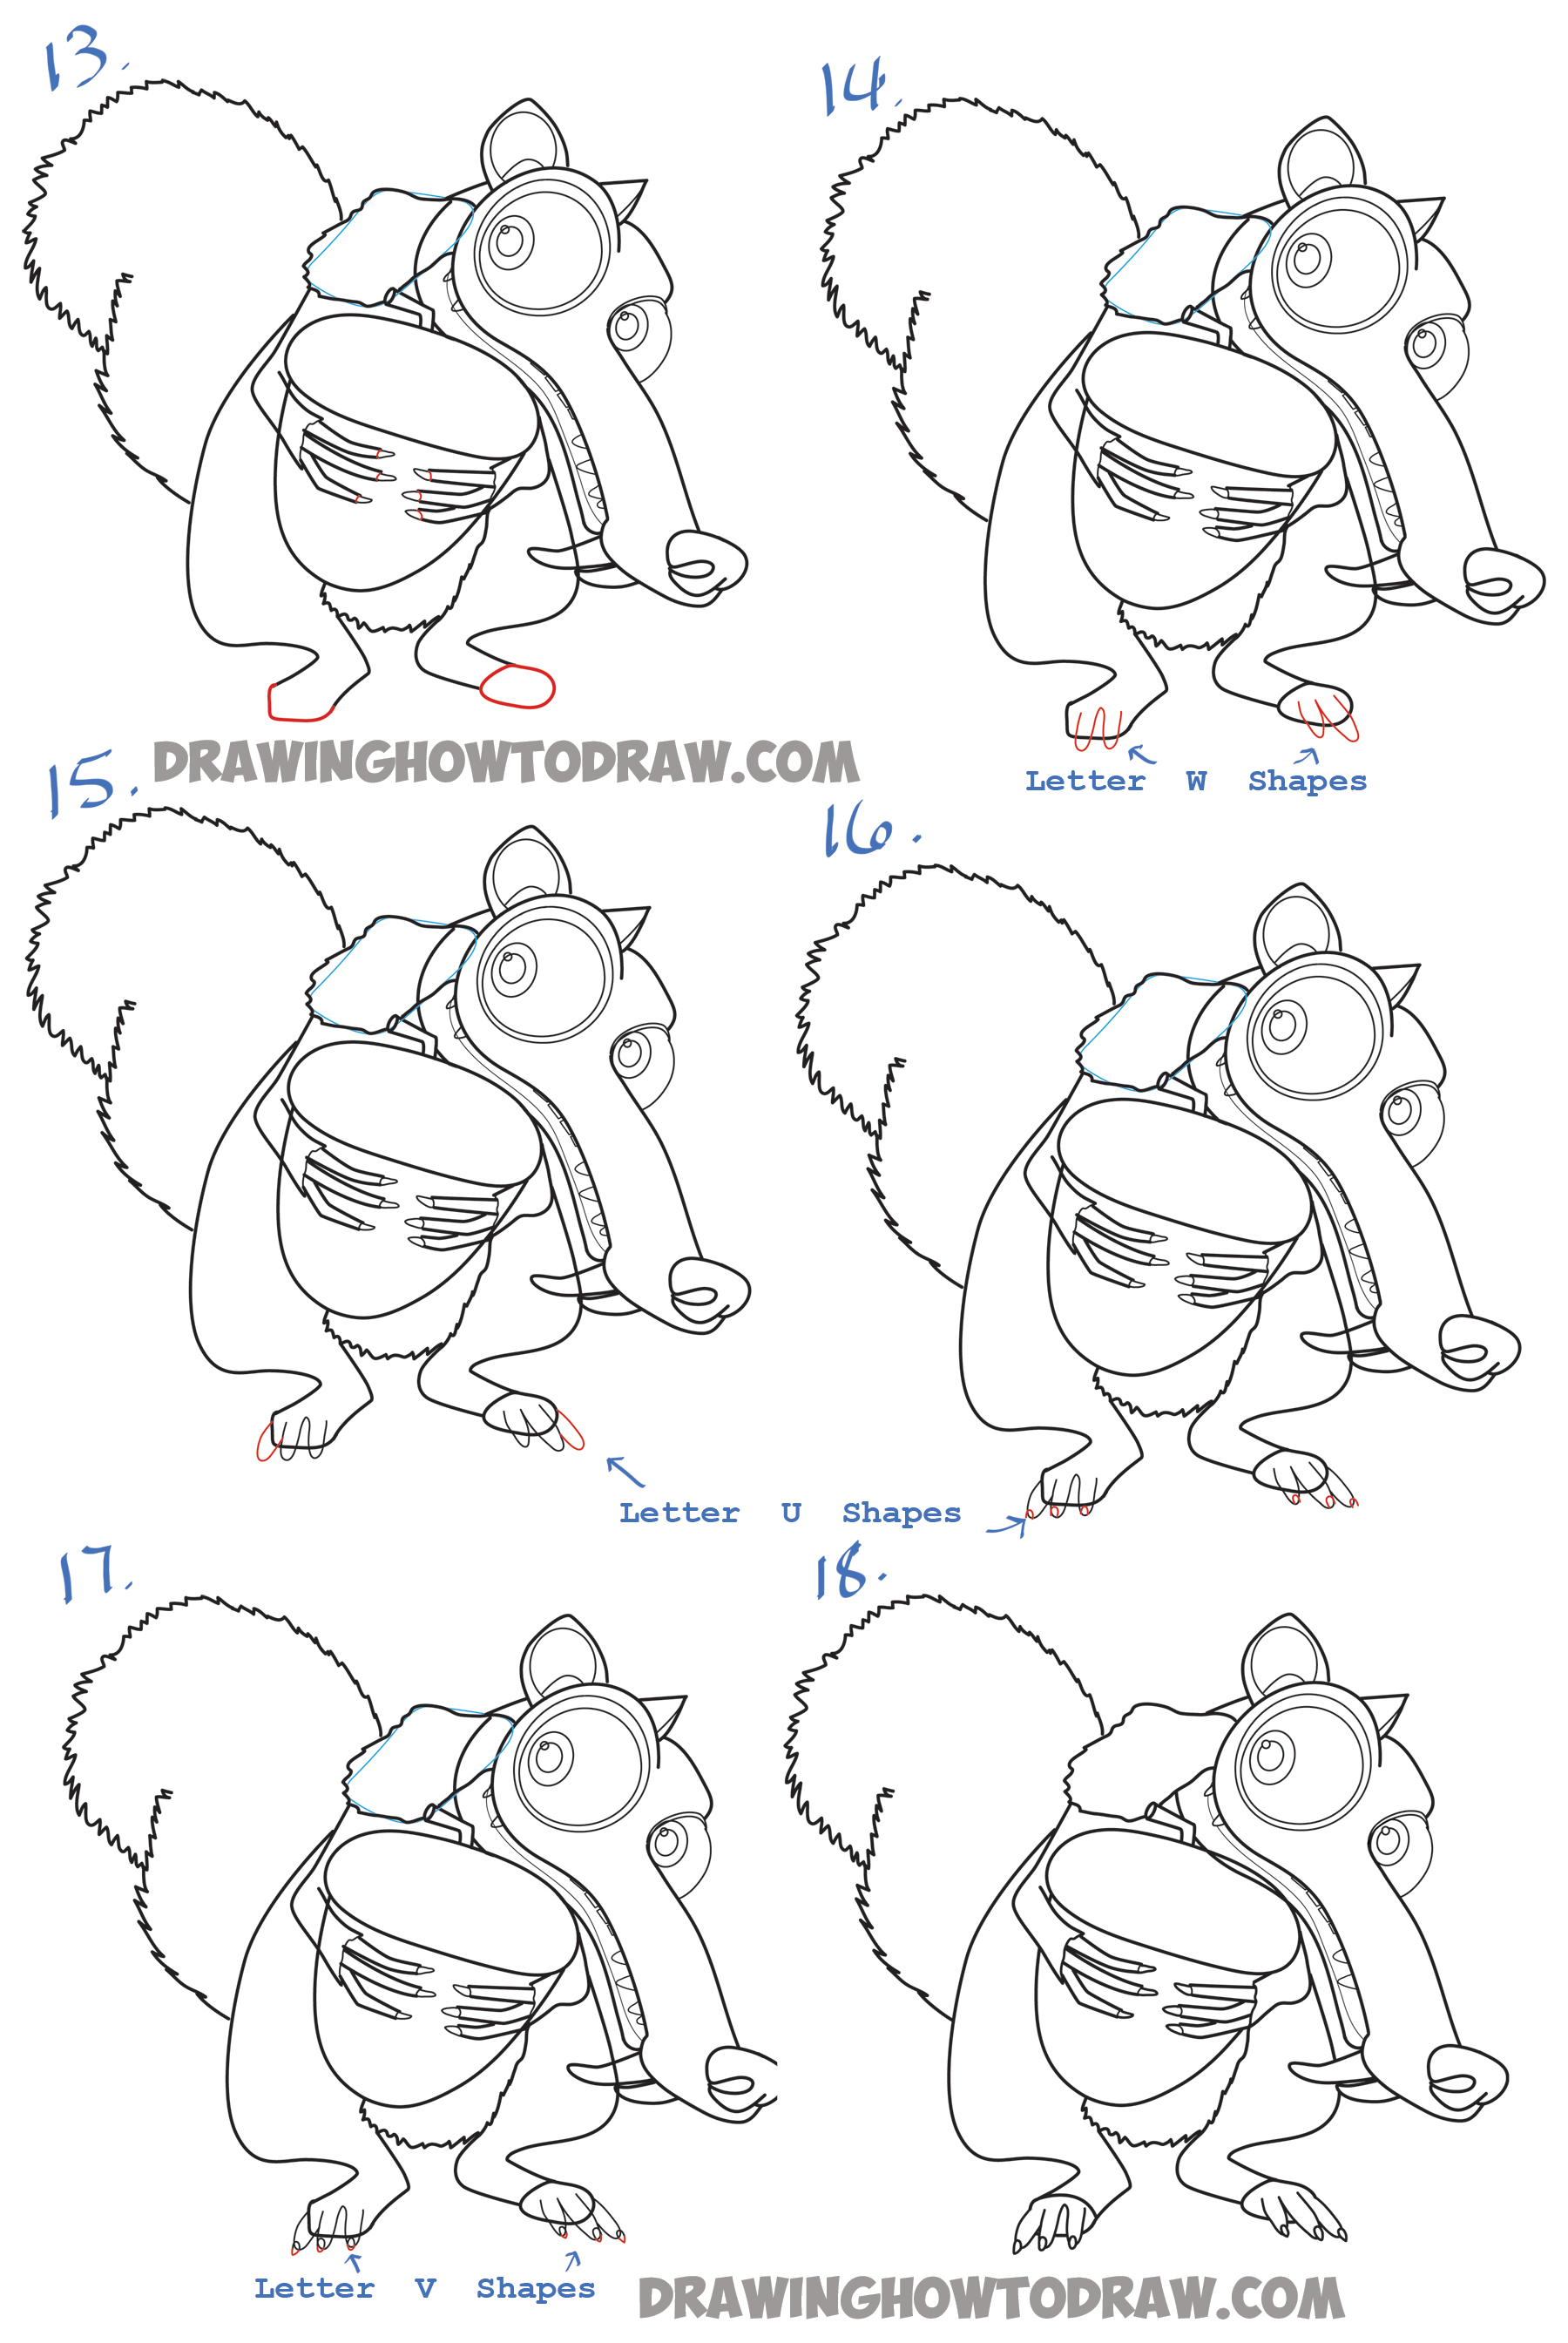 How to Draw Acorns - Really Easy Drawing Tutorial